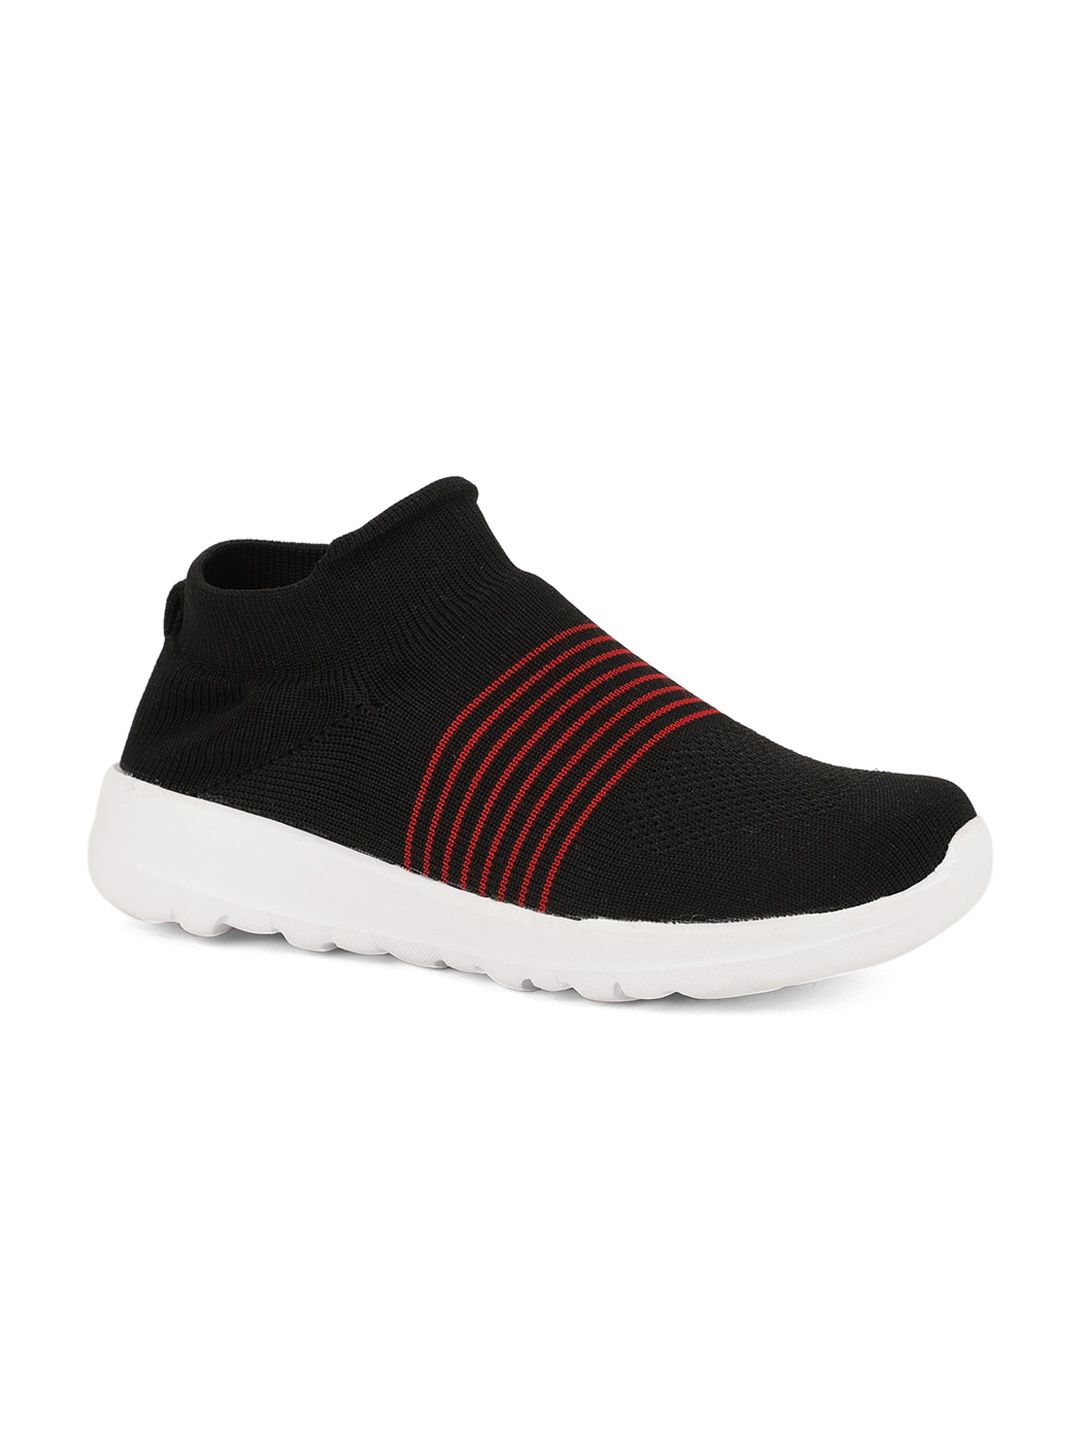 HERE&NOW Women Black Woven Design Slip-On Sneakers Price in India